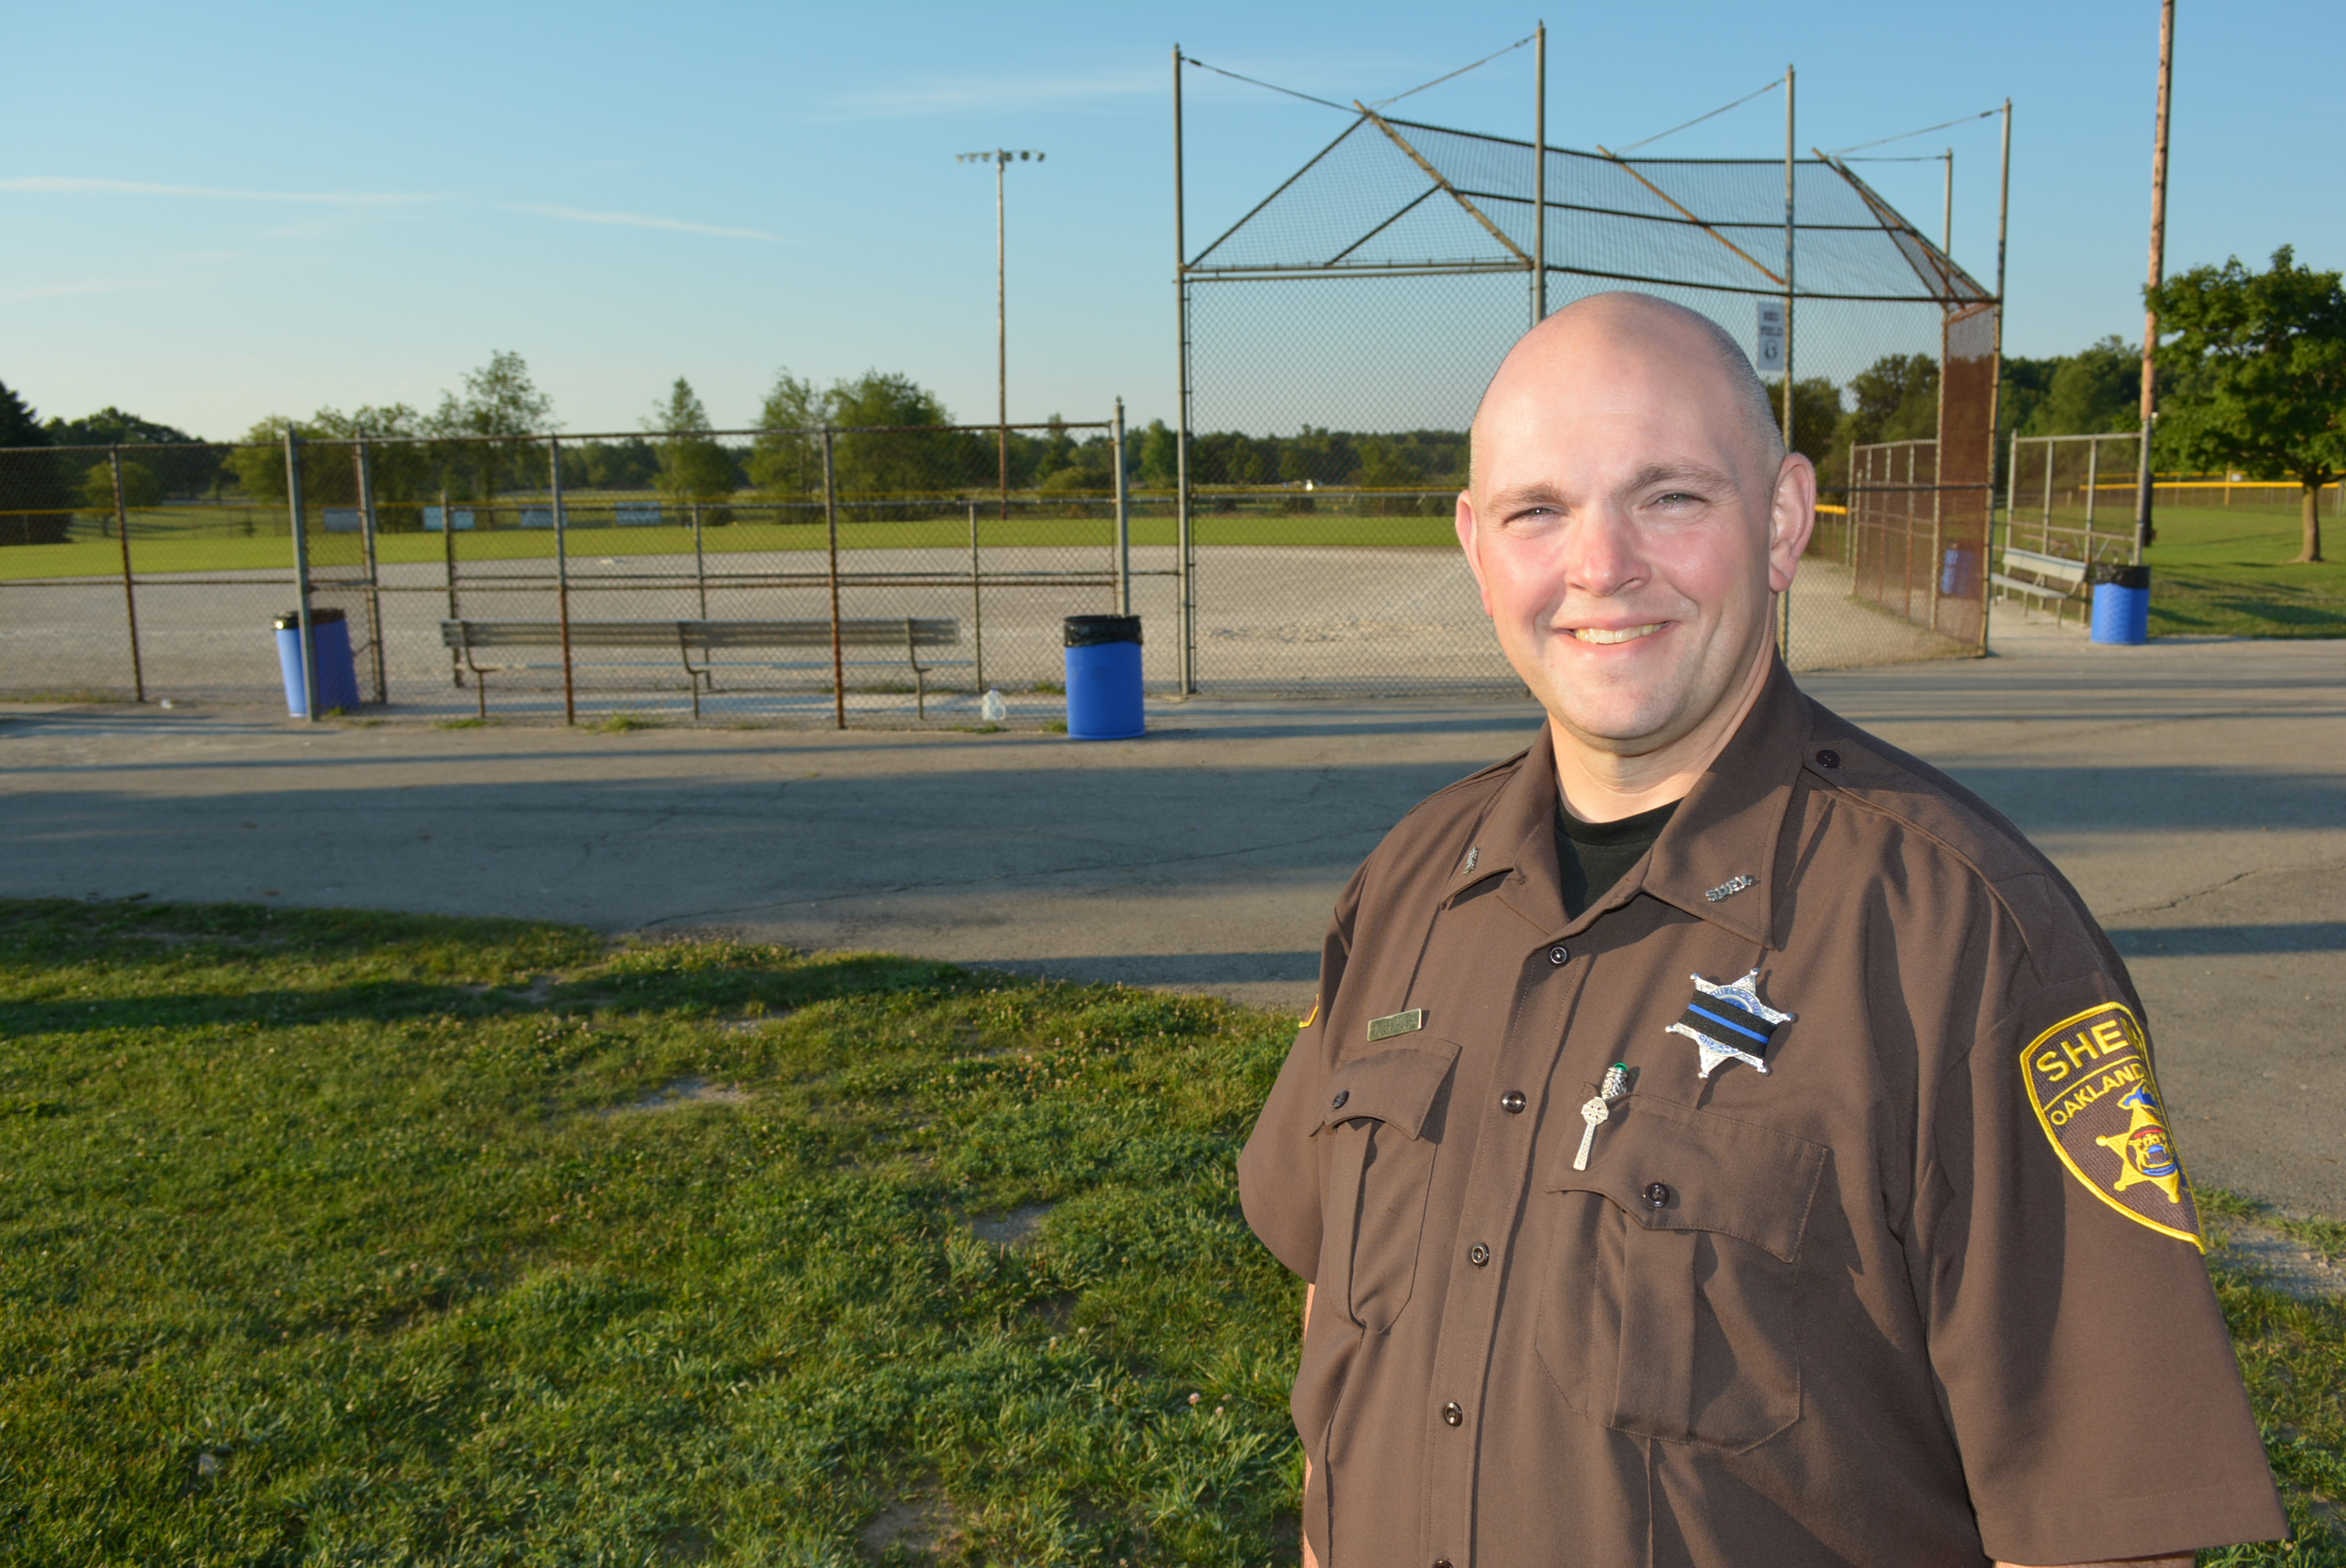 Oakland County Sheriff's deputy Mark Chevalier is inviting the public to the Bars vs. Cars charity softball game at Seymour Lake Township Park in Oxford. Photo by C.J. Carnacchio.